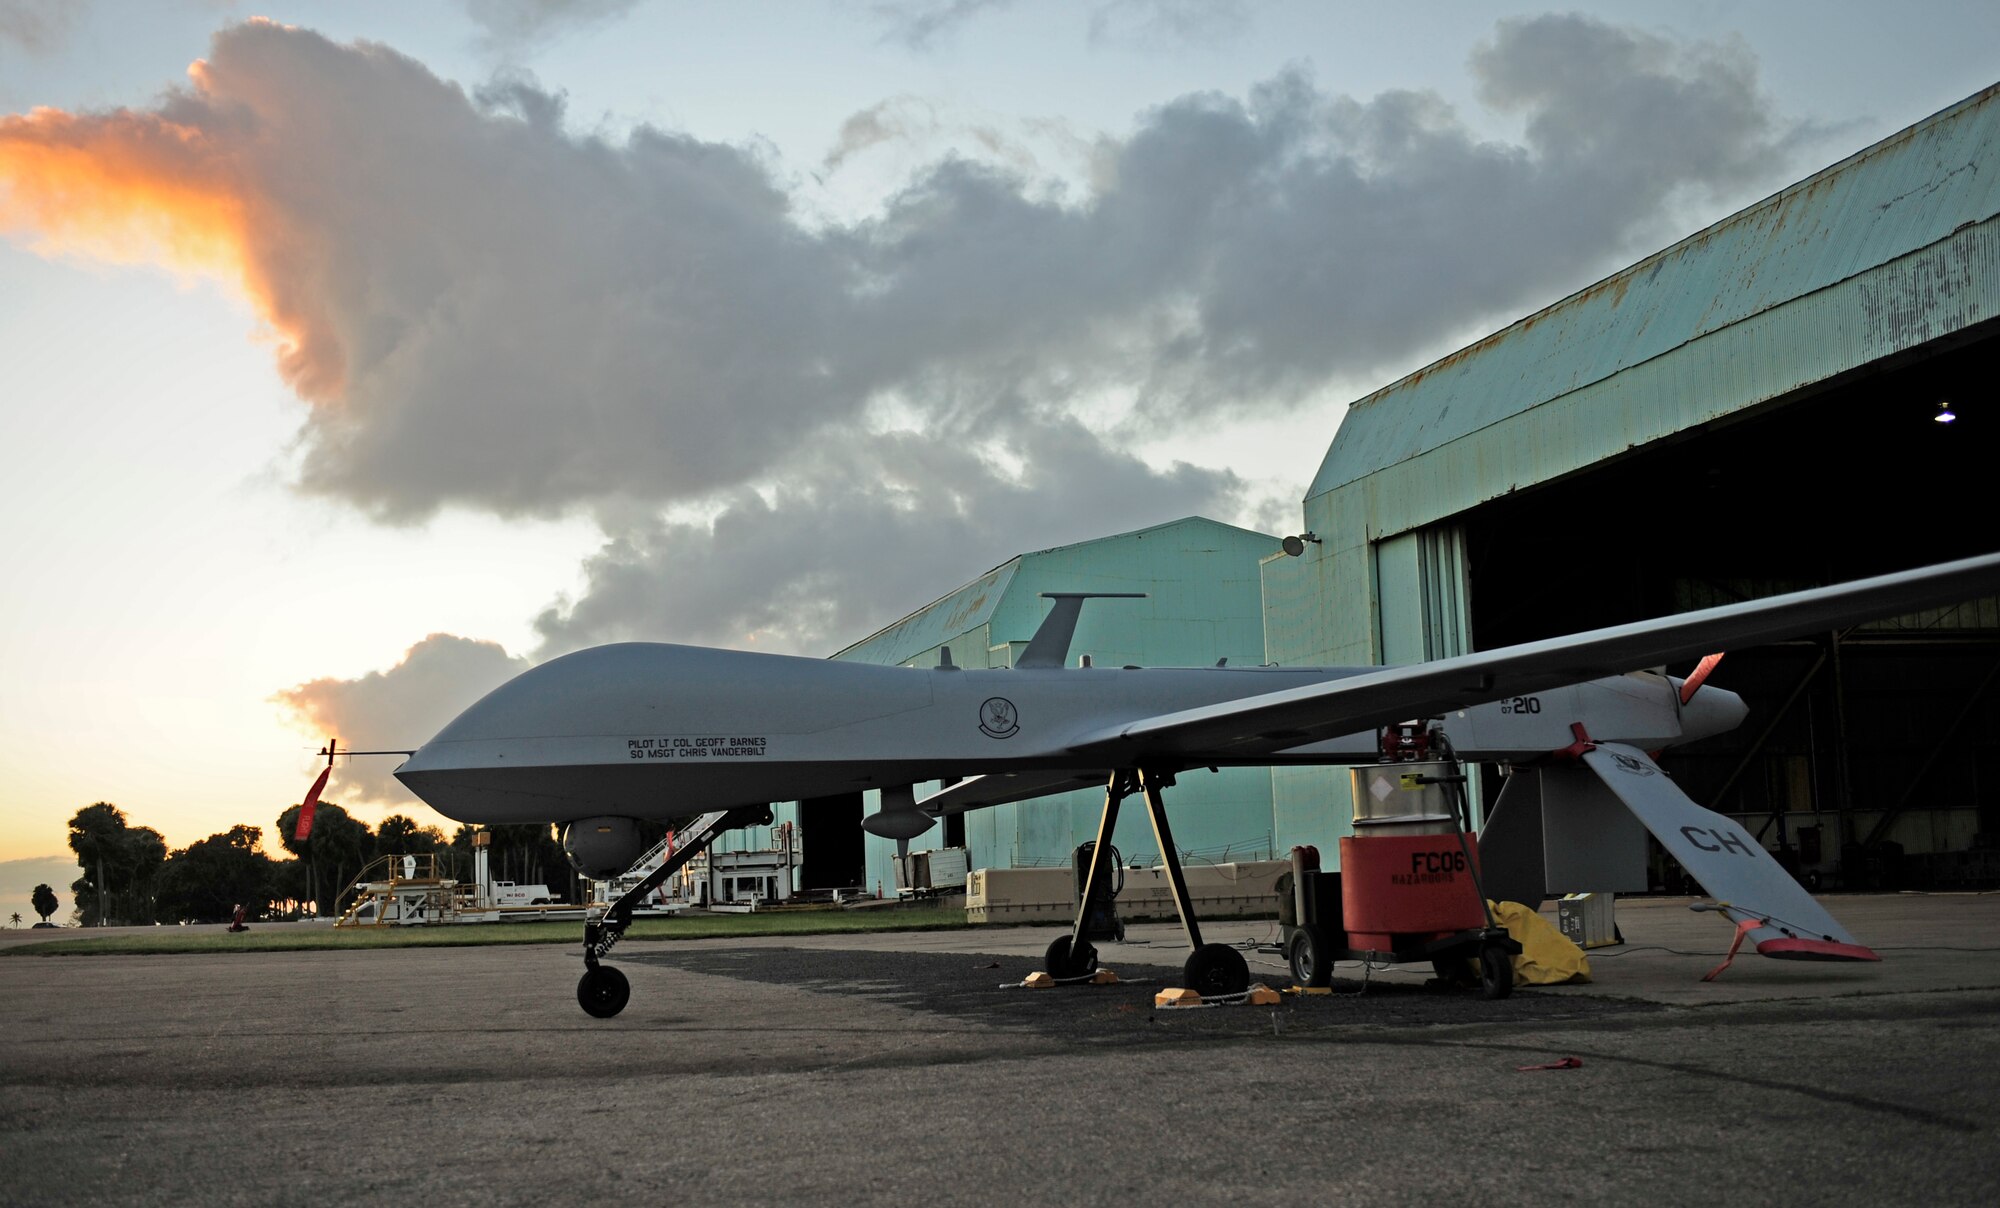 An RQ-1 Predator prepares for takeoff at Aeropuerto Rafael Hernandez outside Aquadilla, Puerto Rico on 27 Jan., 2010.  The RQ-1 remotely piloted systems are operating out of Puerto Rico in support of Operation Unified Response in Haiti.  Airmen from Creech Air Force Base, Las Vegas, Nev. are providing 24 hour a day full-motion video in real time to international relief workers on the ground in order to speed humanitarian aid to remote and cut-off areas of the country following the earthquake on 12 Jan., 2010. (U.S. Air Force photo by Tech. Sgt. James L. Harper Jr.)